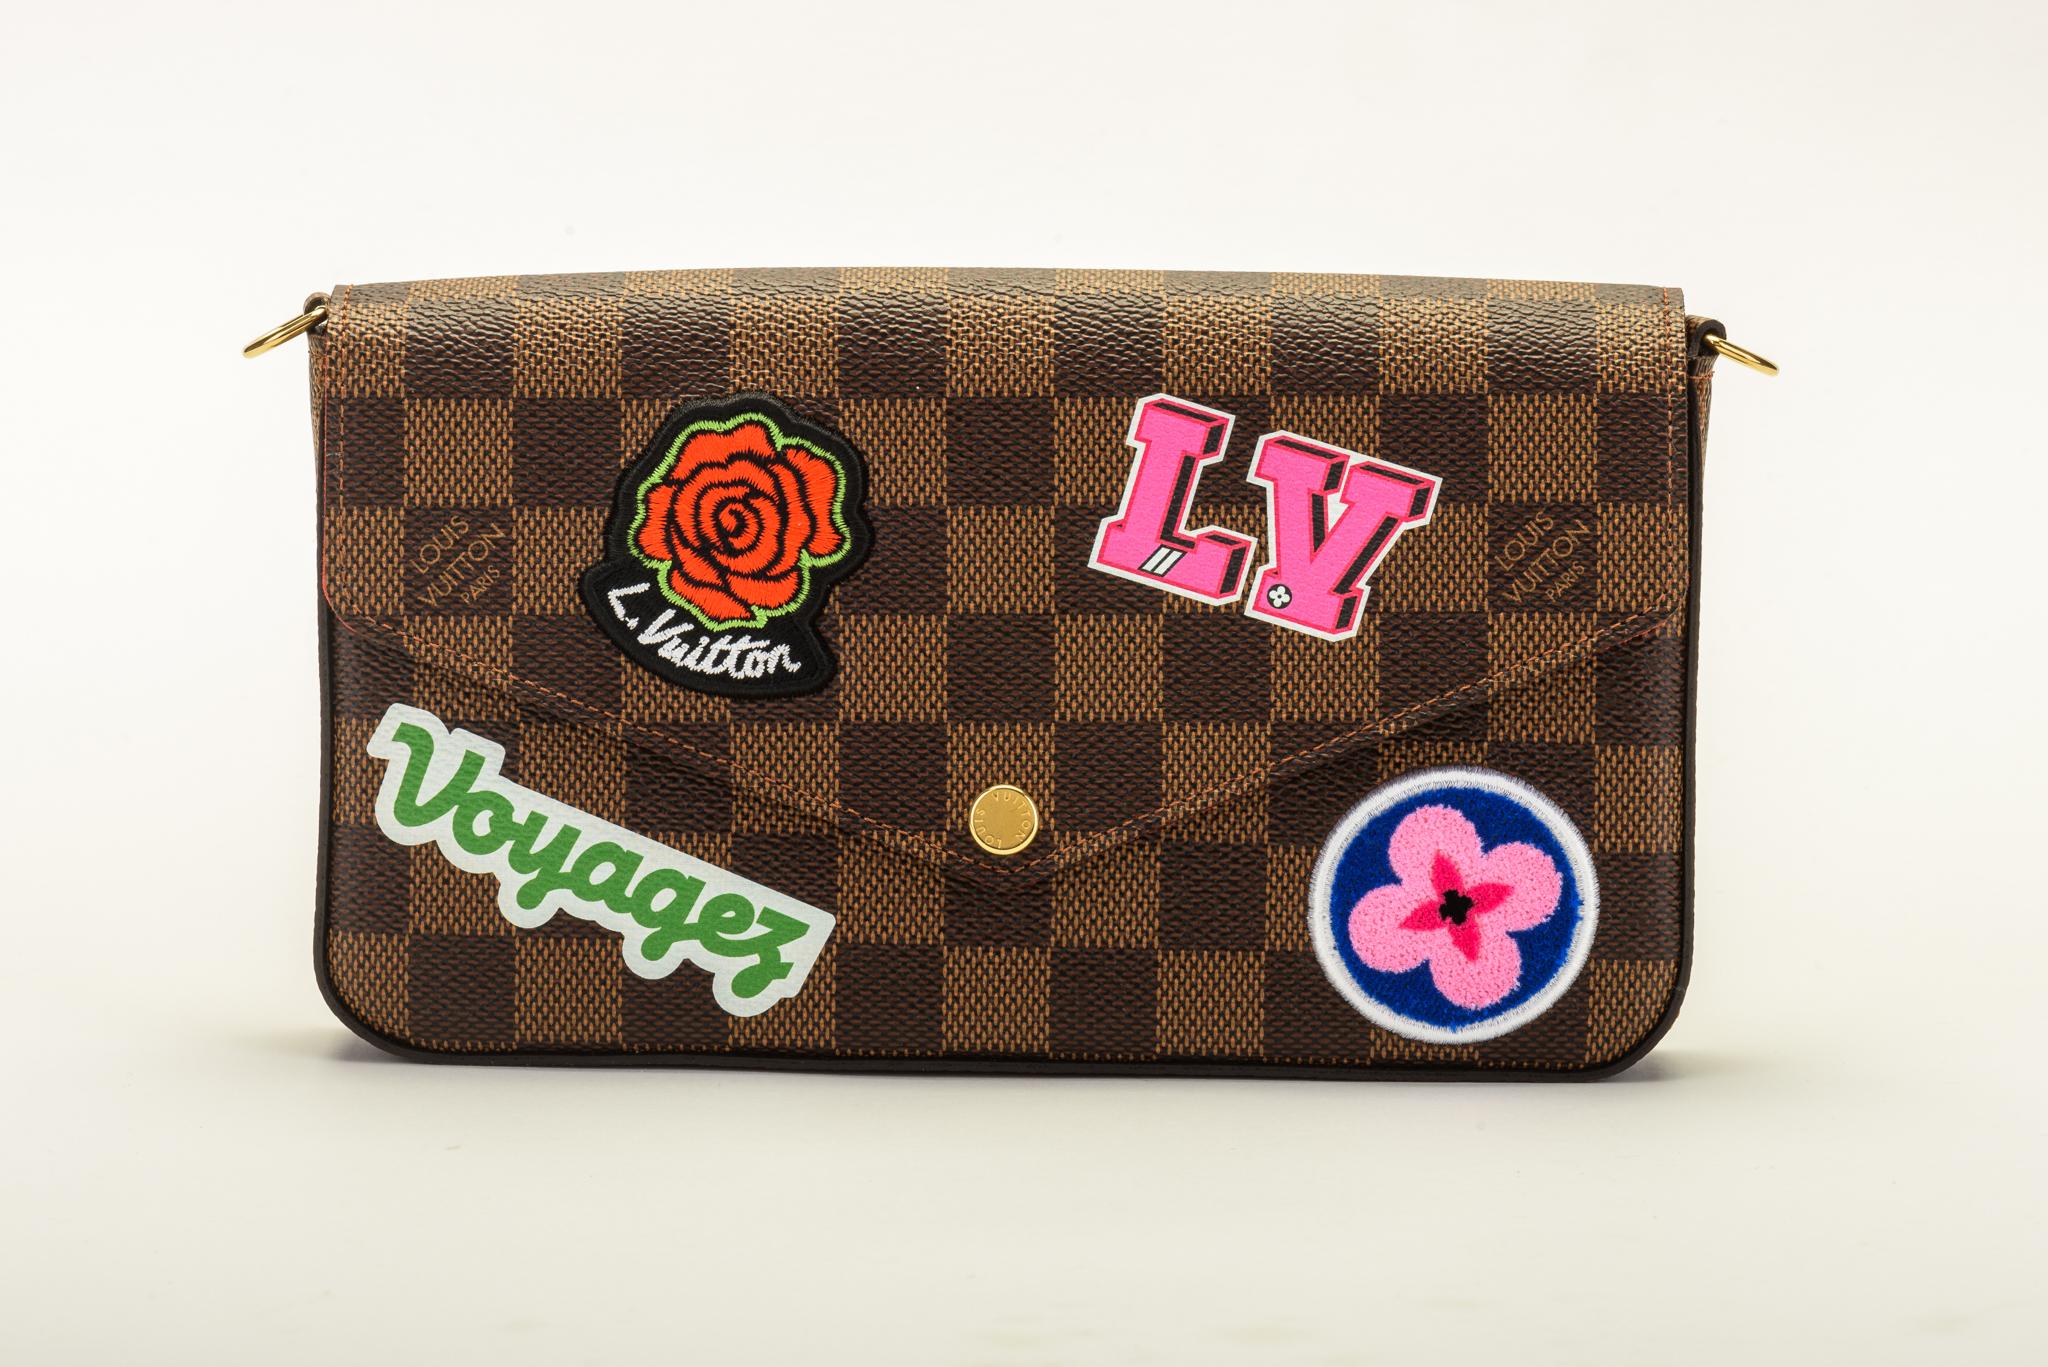 Brand new in box Louis Vuitton limited edition felicie cross body damier with multicolor stickers. Detachable interior credit card holder and zipped pouchette. Comes with dust cover and box.